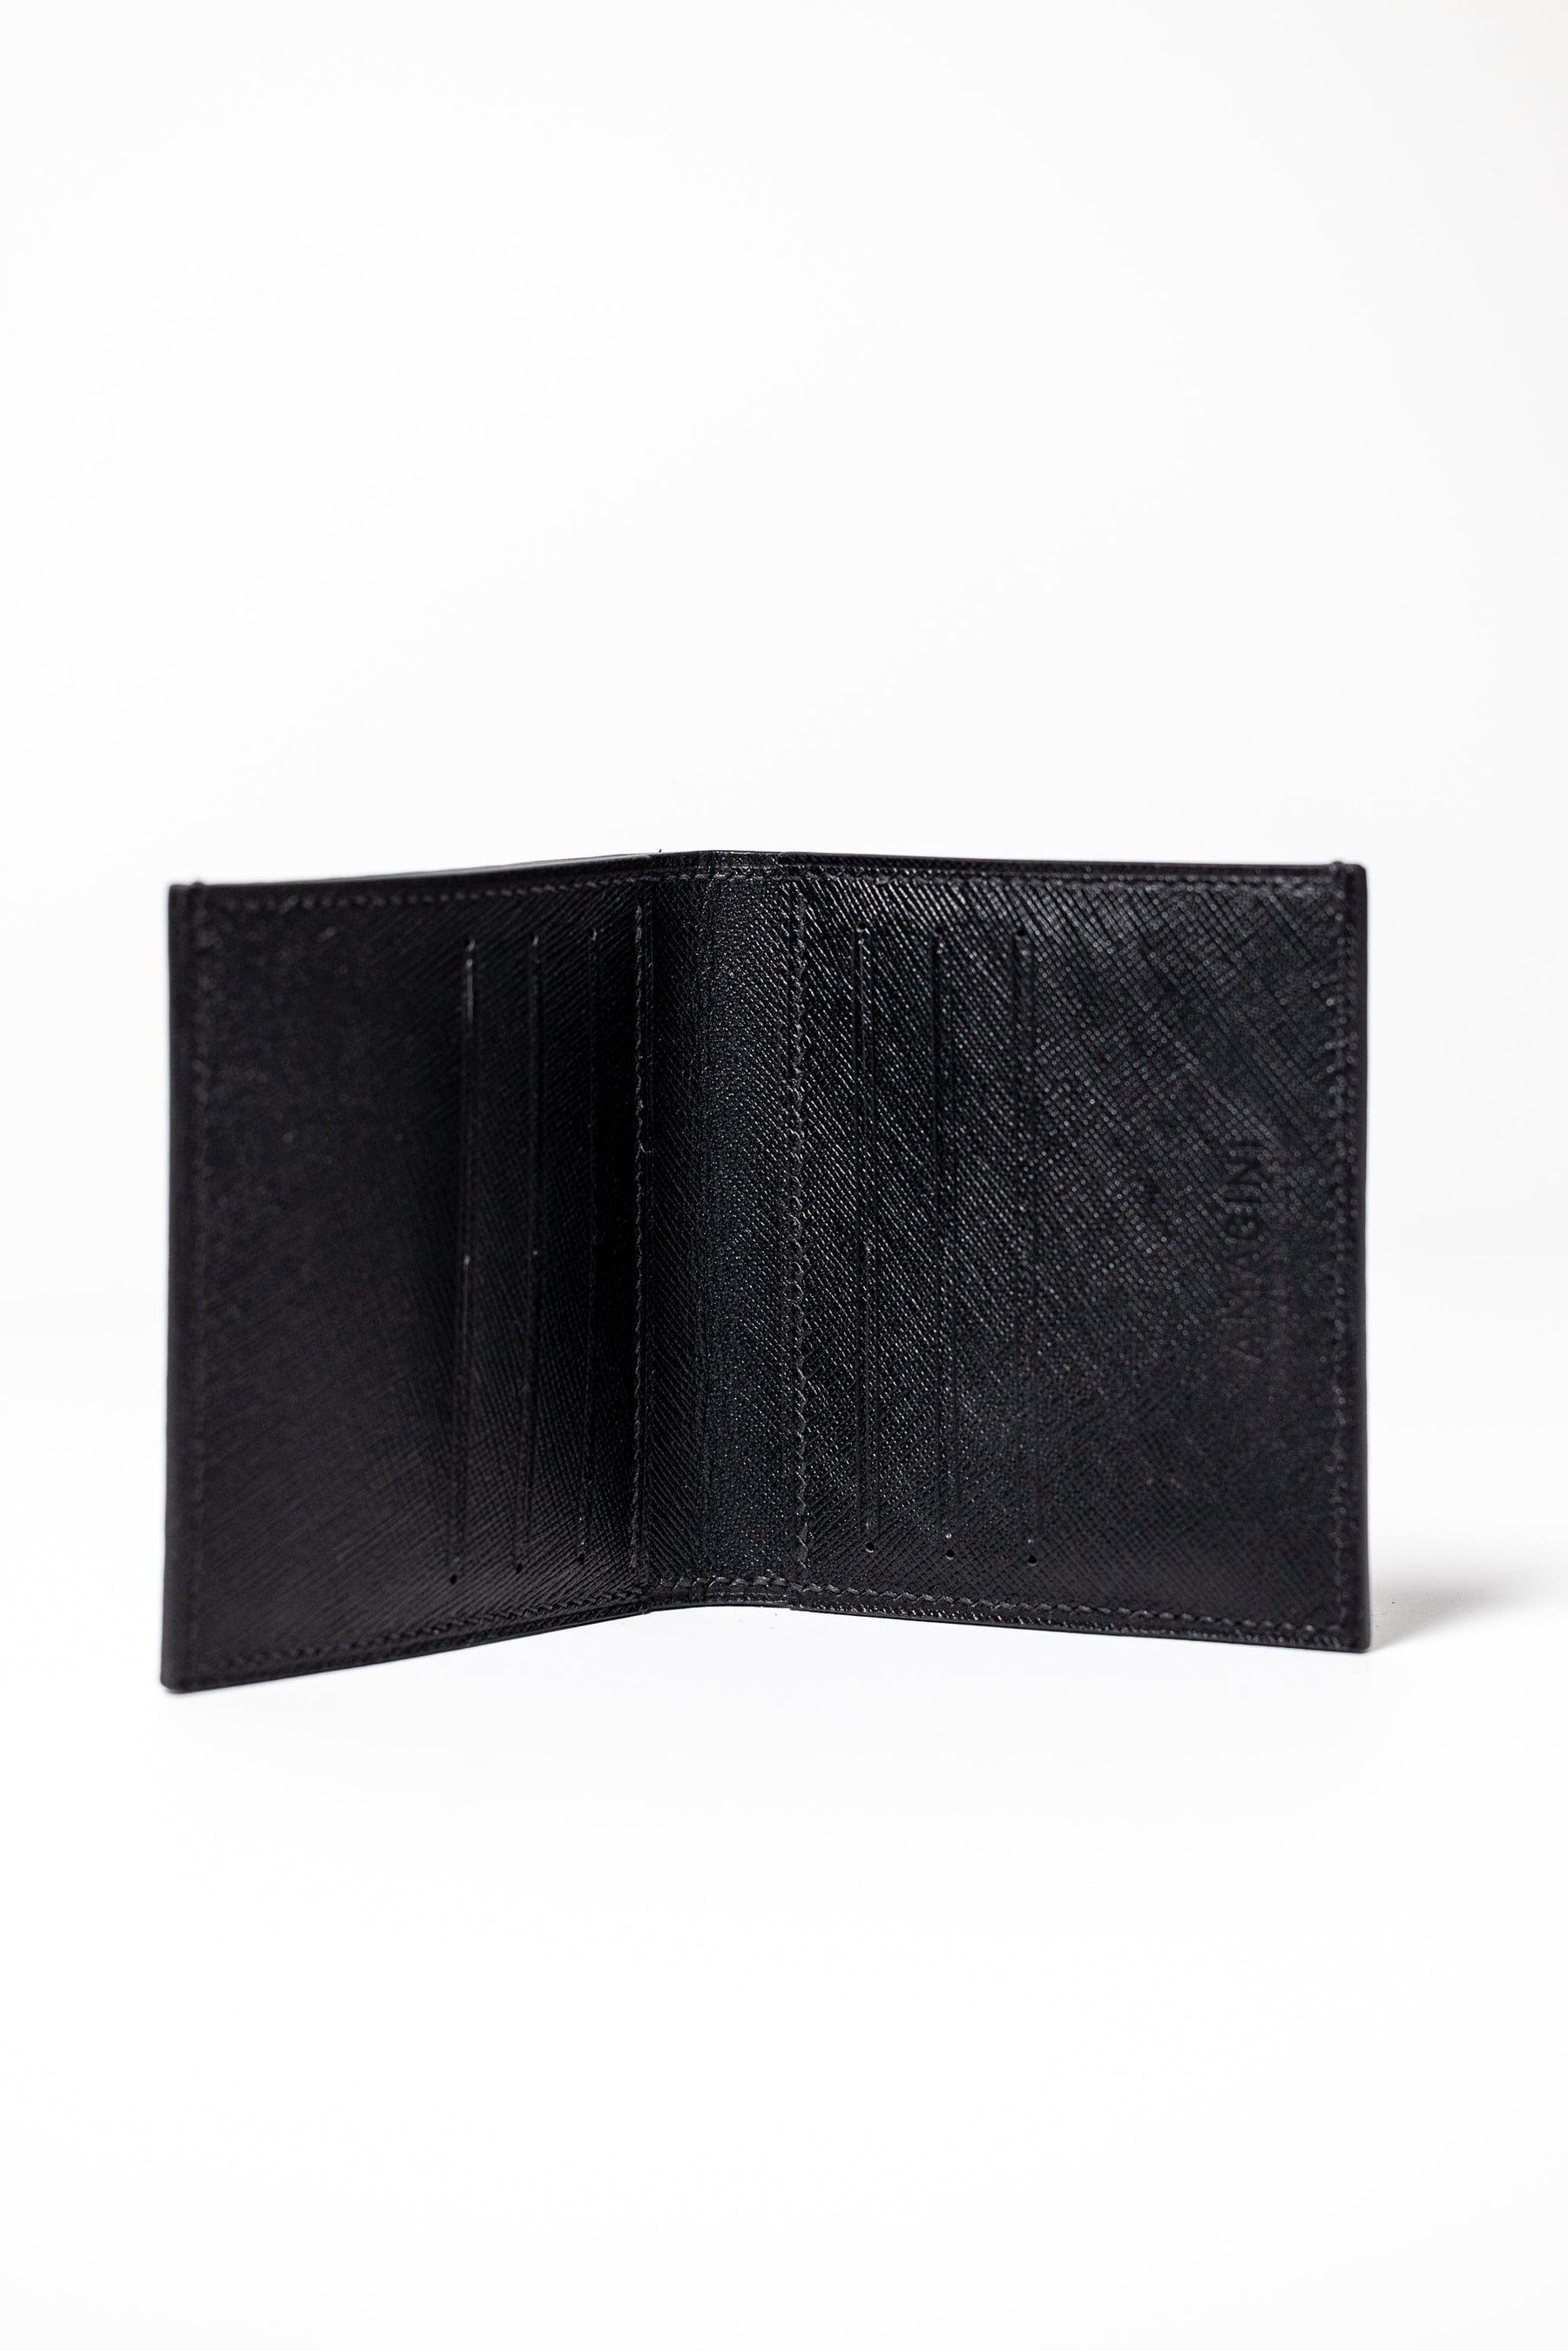 The Tremont Wallet - Black and Gray Python